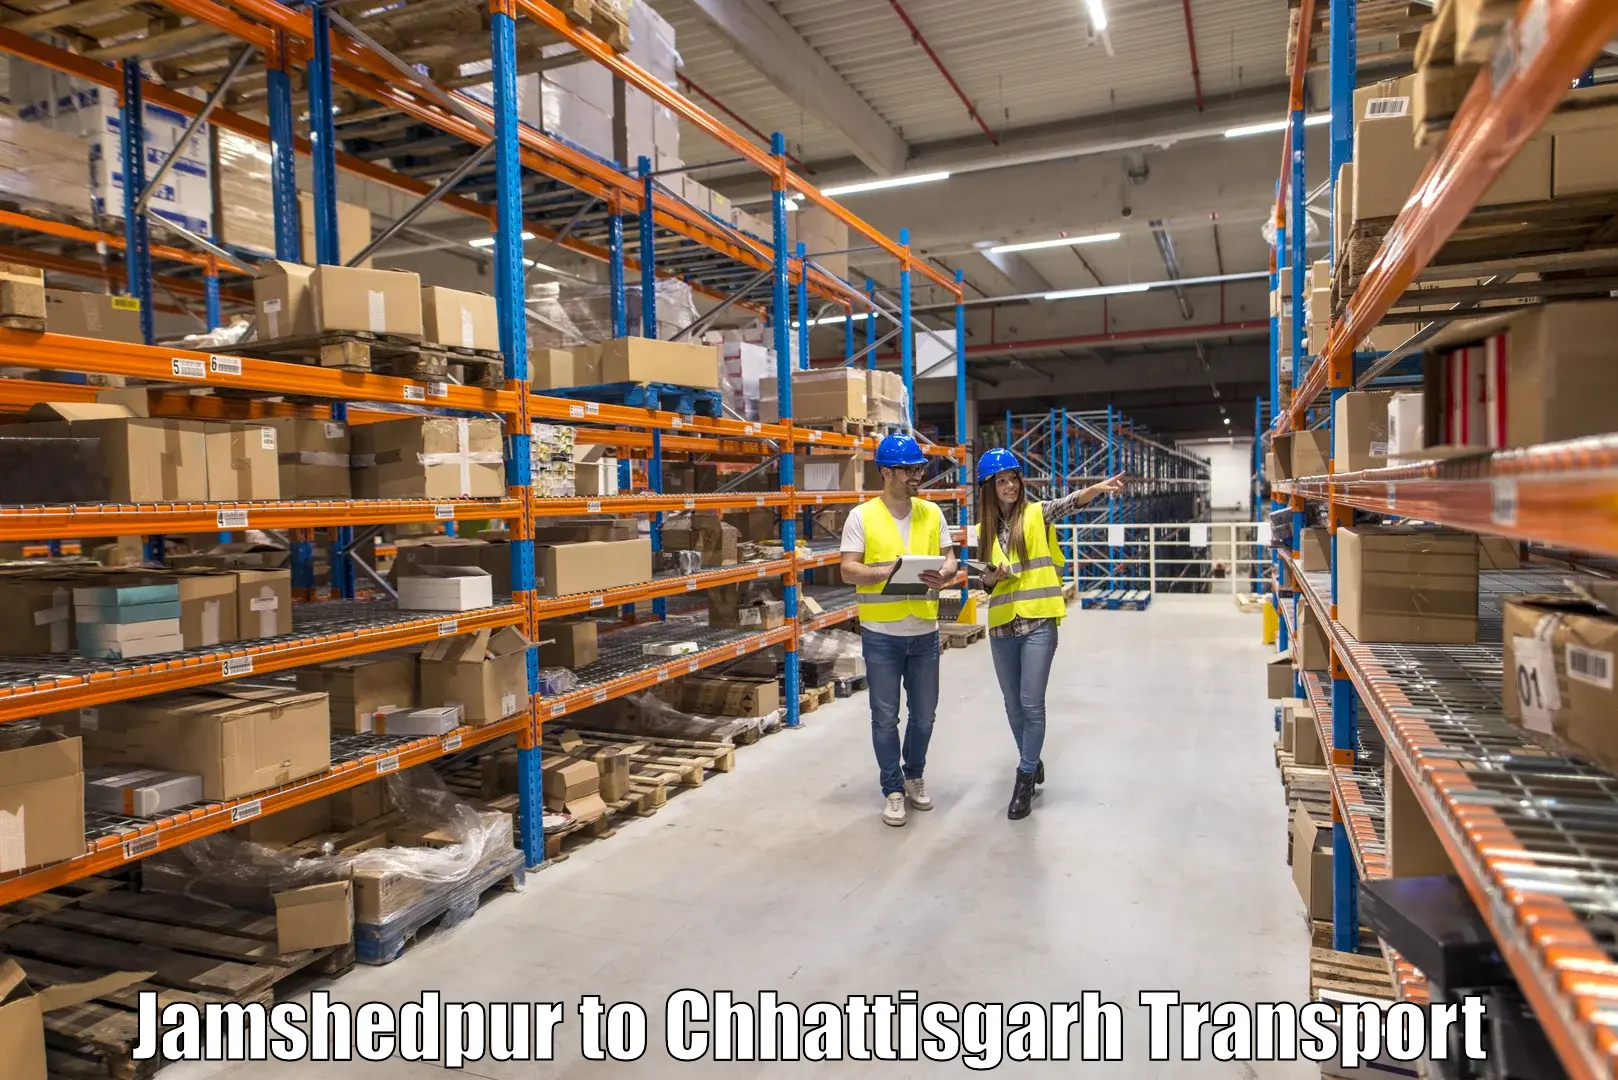 Container transport service Jamshedpur to Raigarh